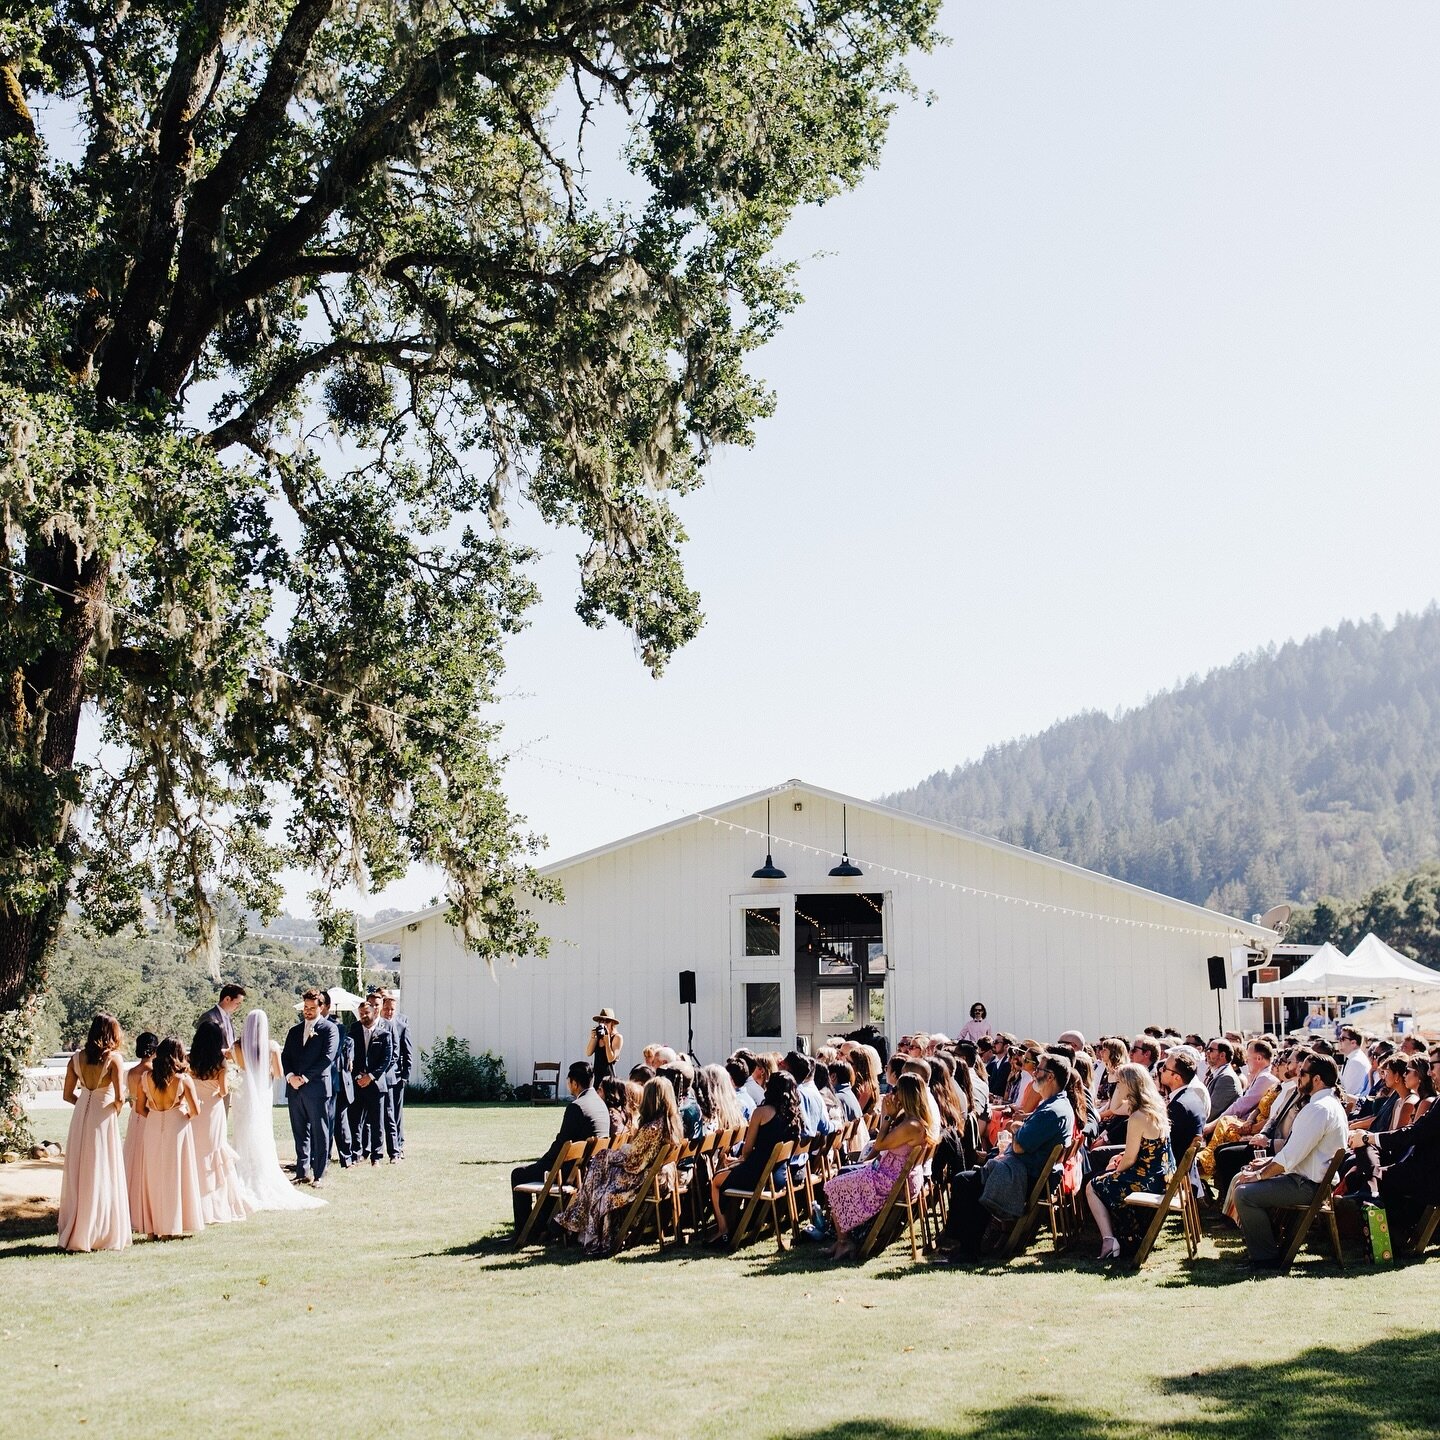 French Oak Ranch has the large white barn for entertainment, the giant Oak tree to have a romantic ceremony under, and plenty of space for all your loved ones! 

#DreamWeddingVenue #WeddingBliss #LoveInBloom #VenueGoals #PicturePerfectVenue #SayIDoHe